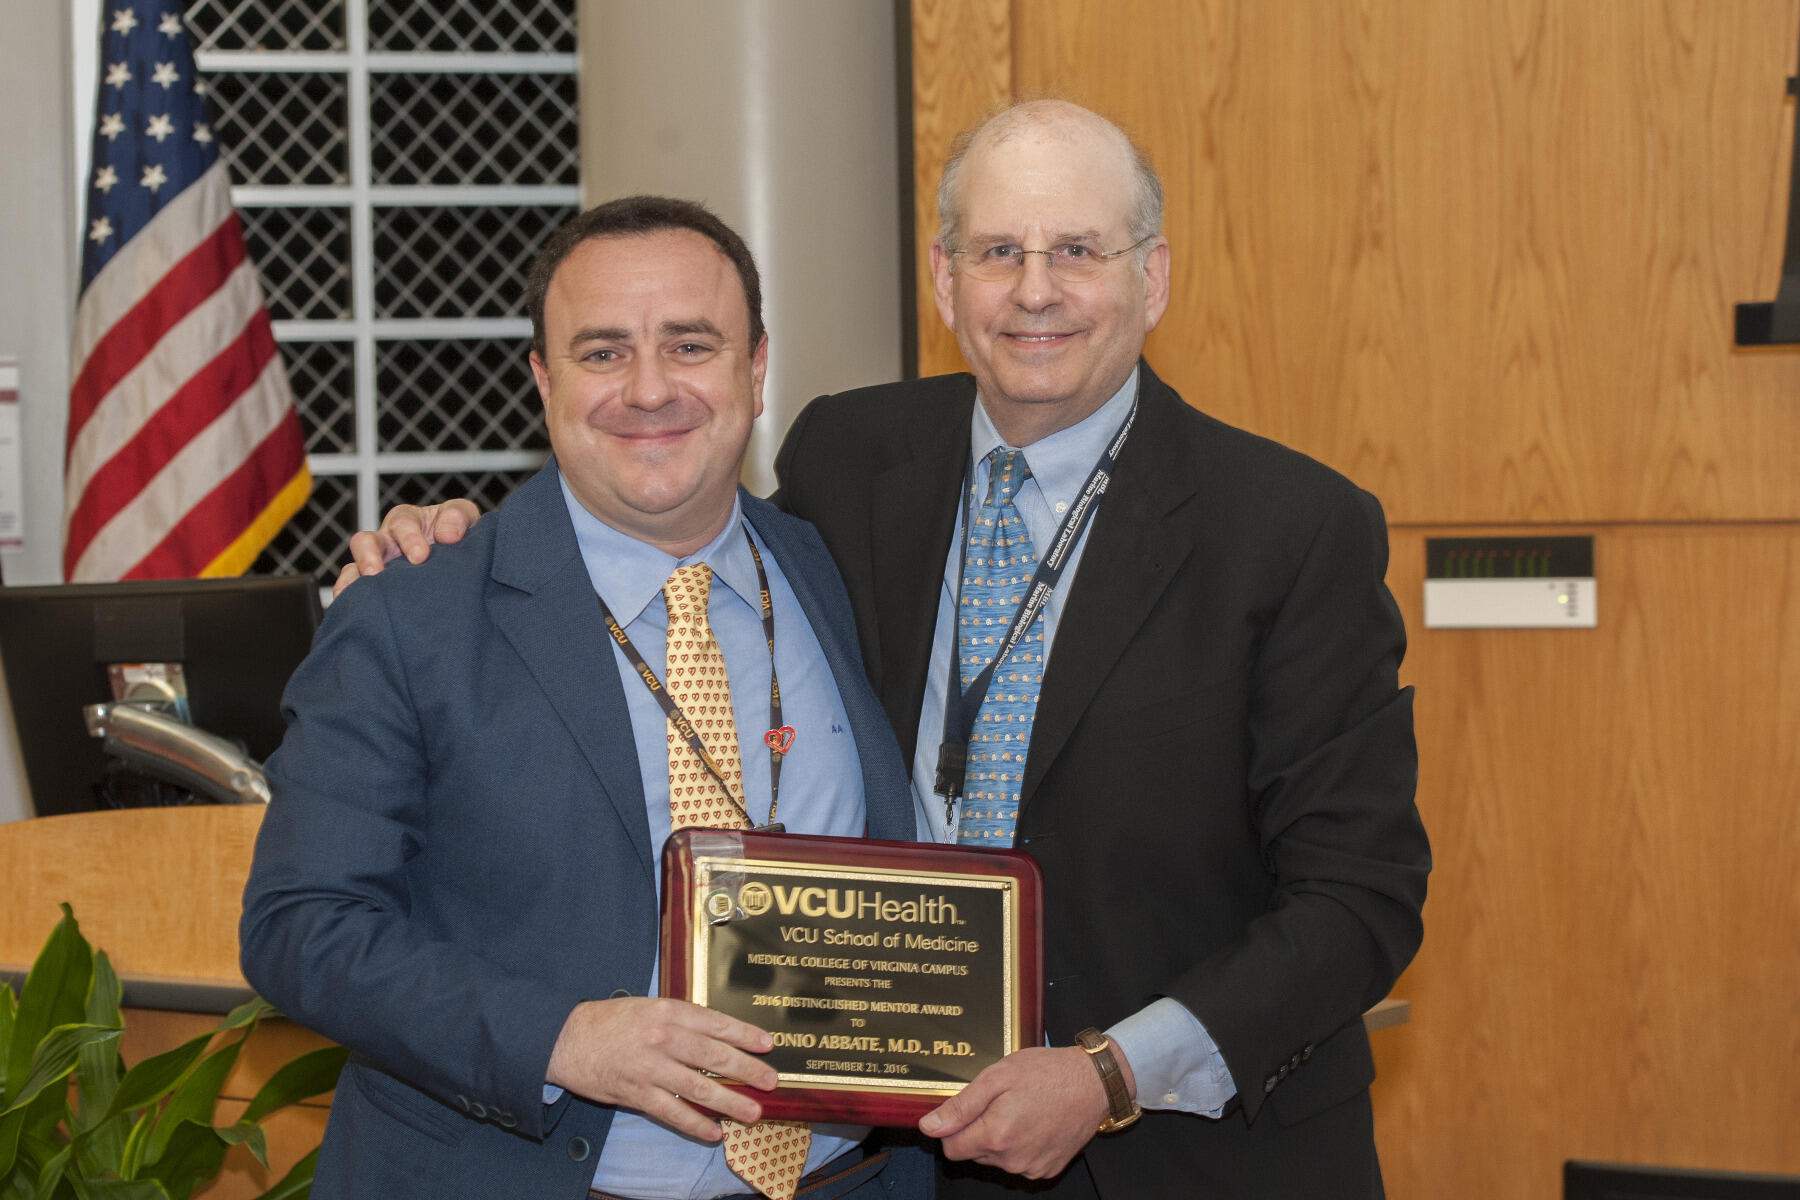 Antonio Abbate (left), M.D., Ph.D., associate professor in the Department of Internal Medicine, was this year’s recipient of the Distinguished Mentor Award. Jerome Strauss (right), M.D., Ph.D., dean of VCU School of Medicine, presented the award.